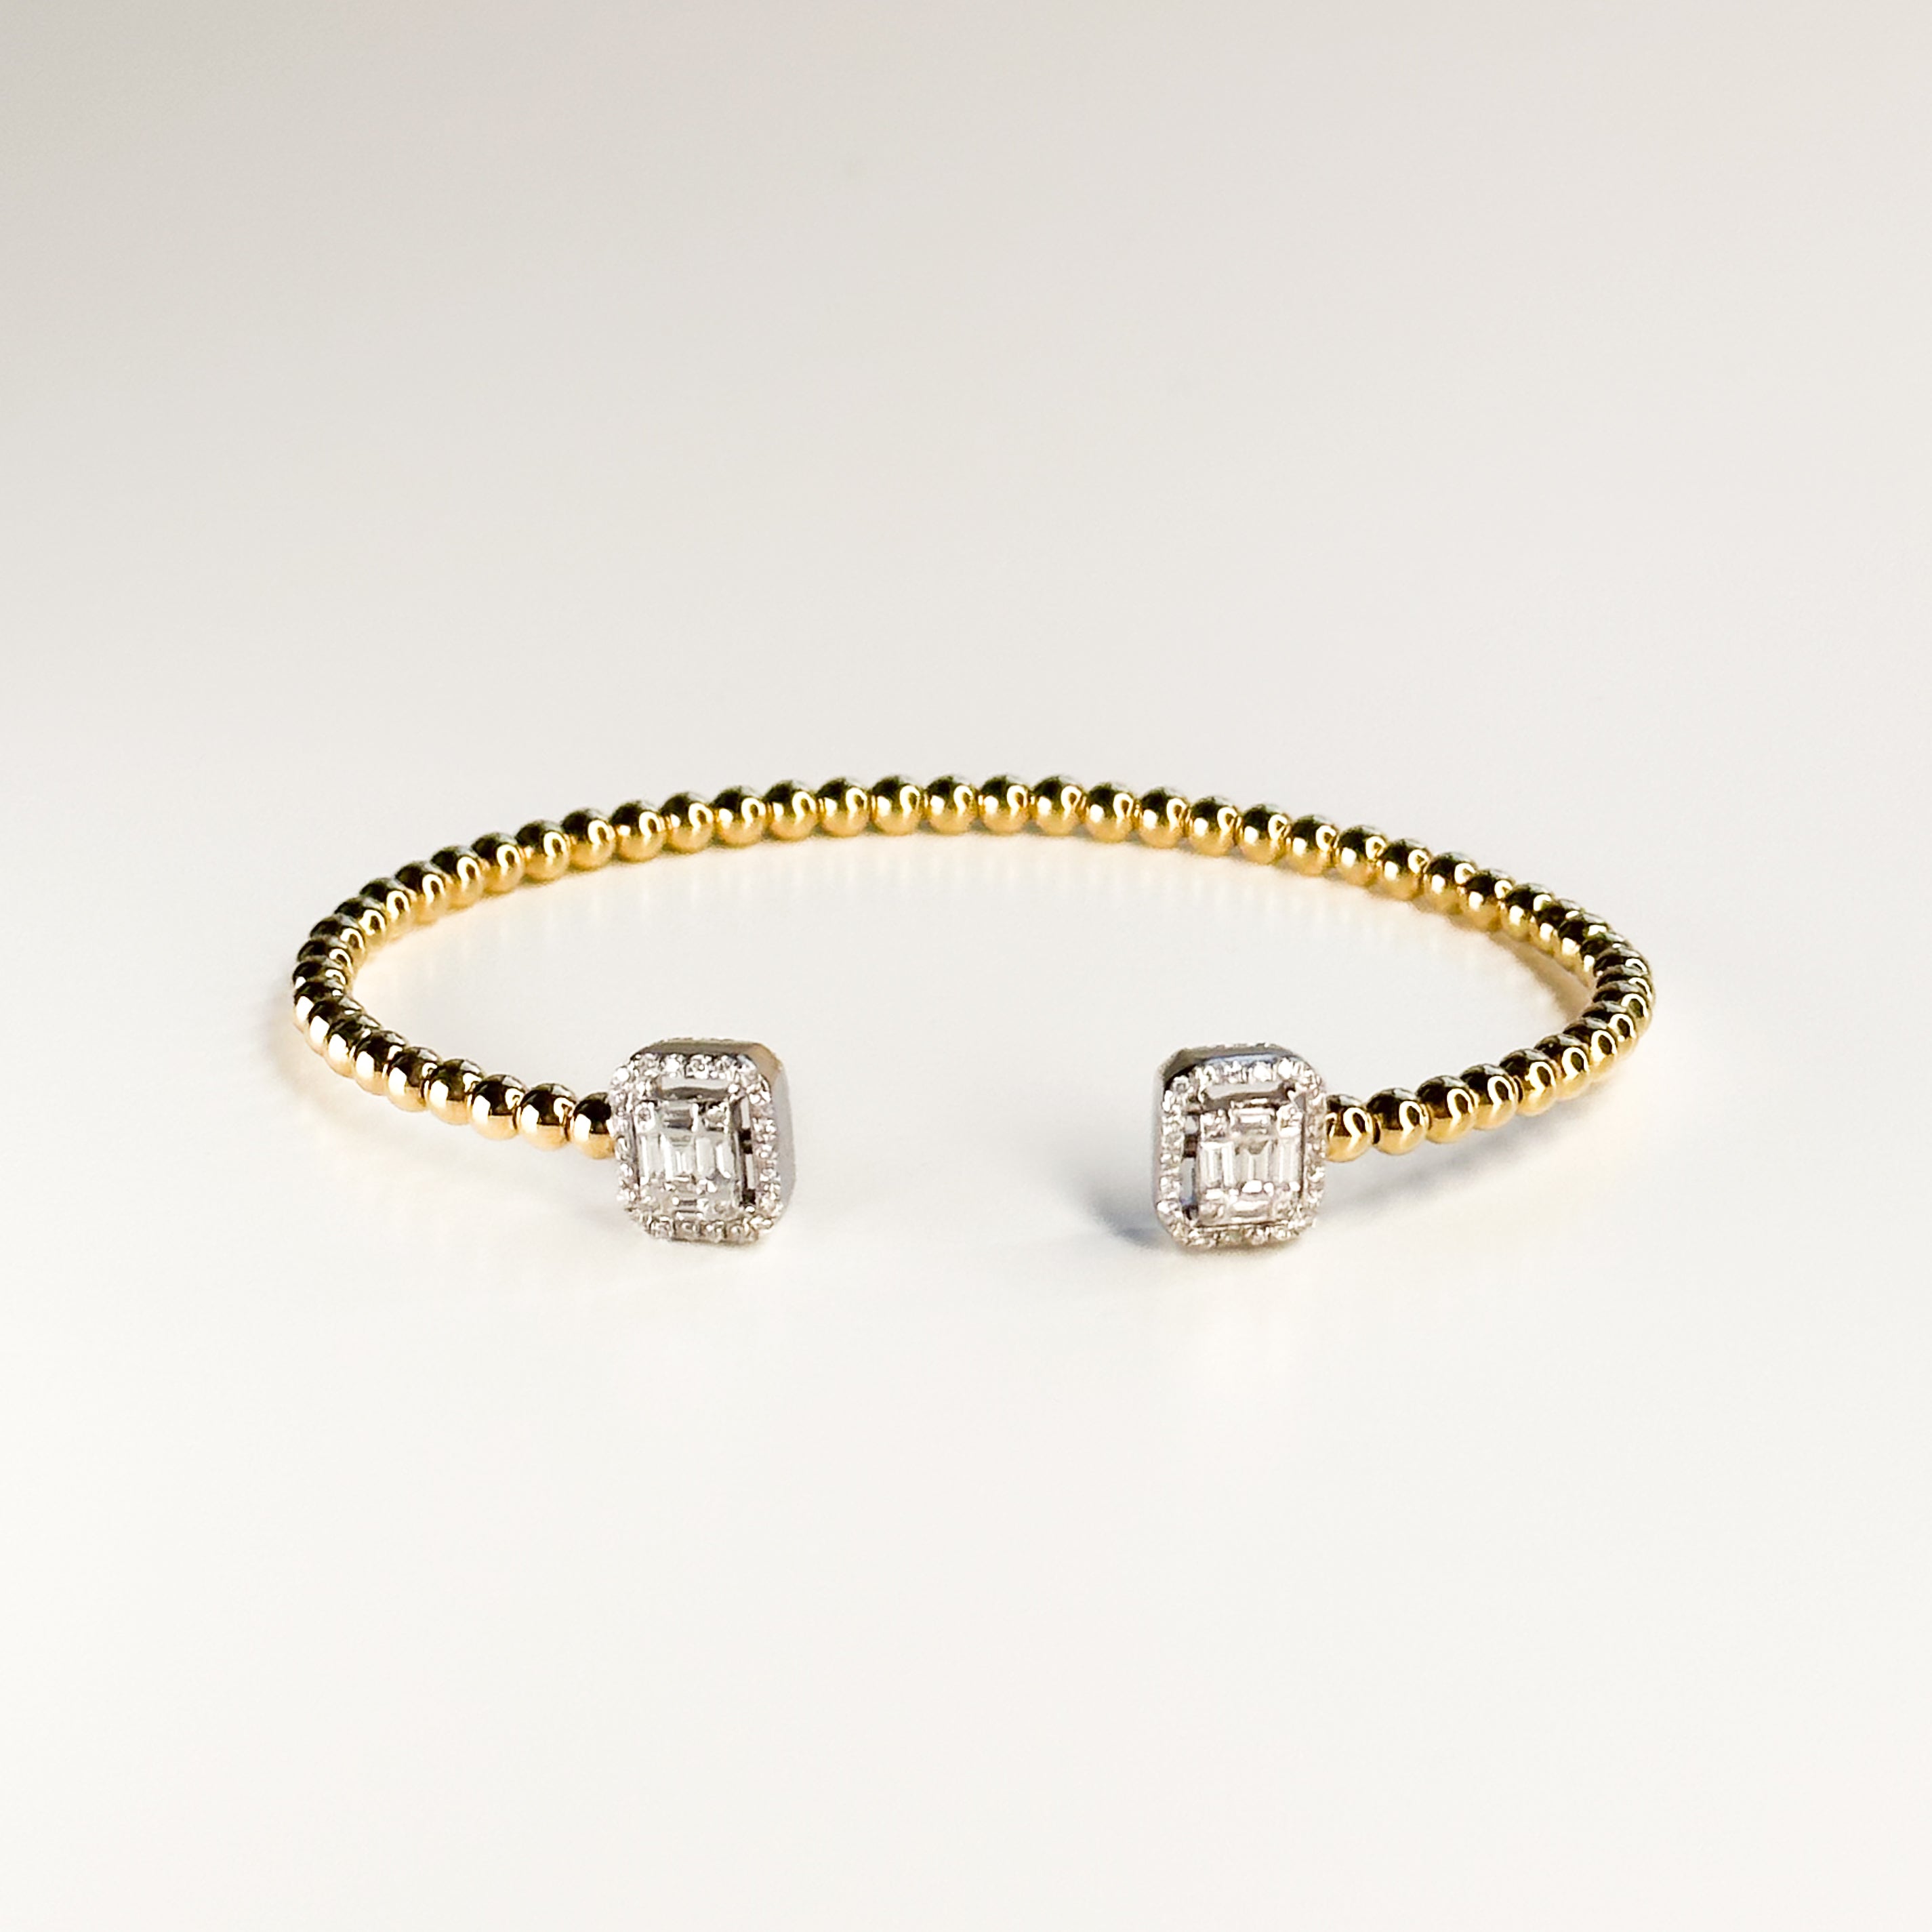 Gold Bracelet with Diamond Clusters